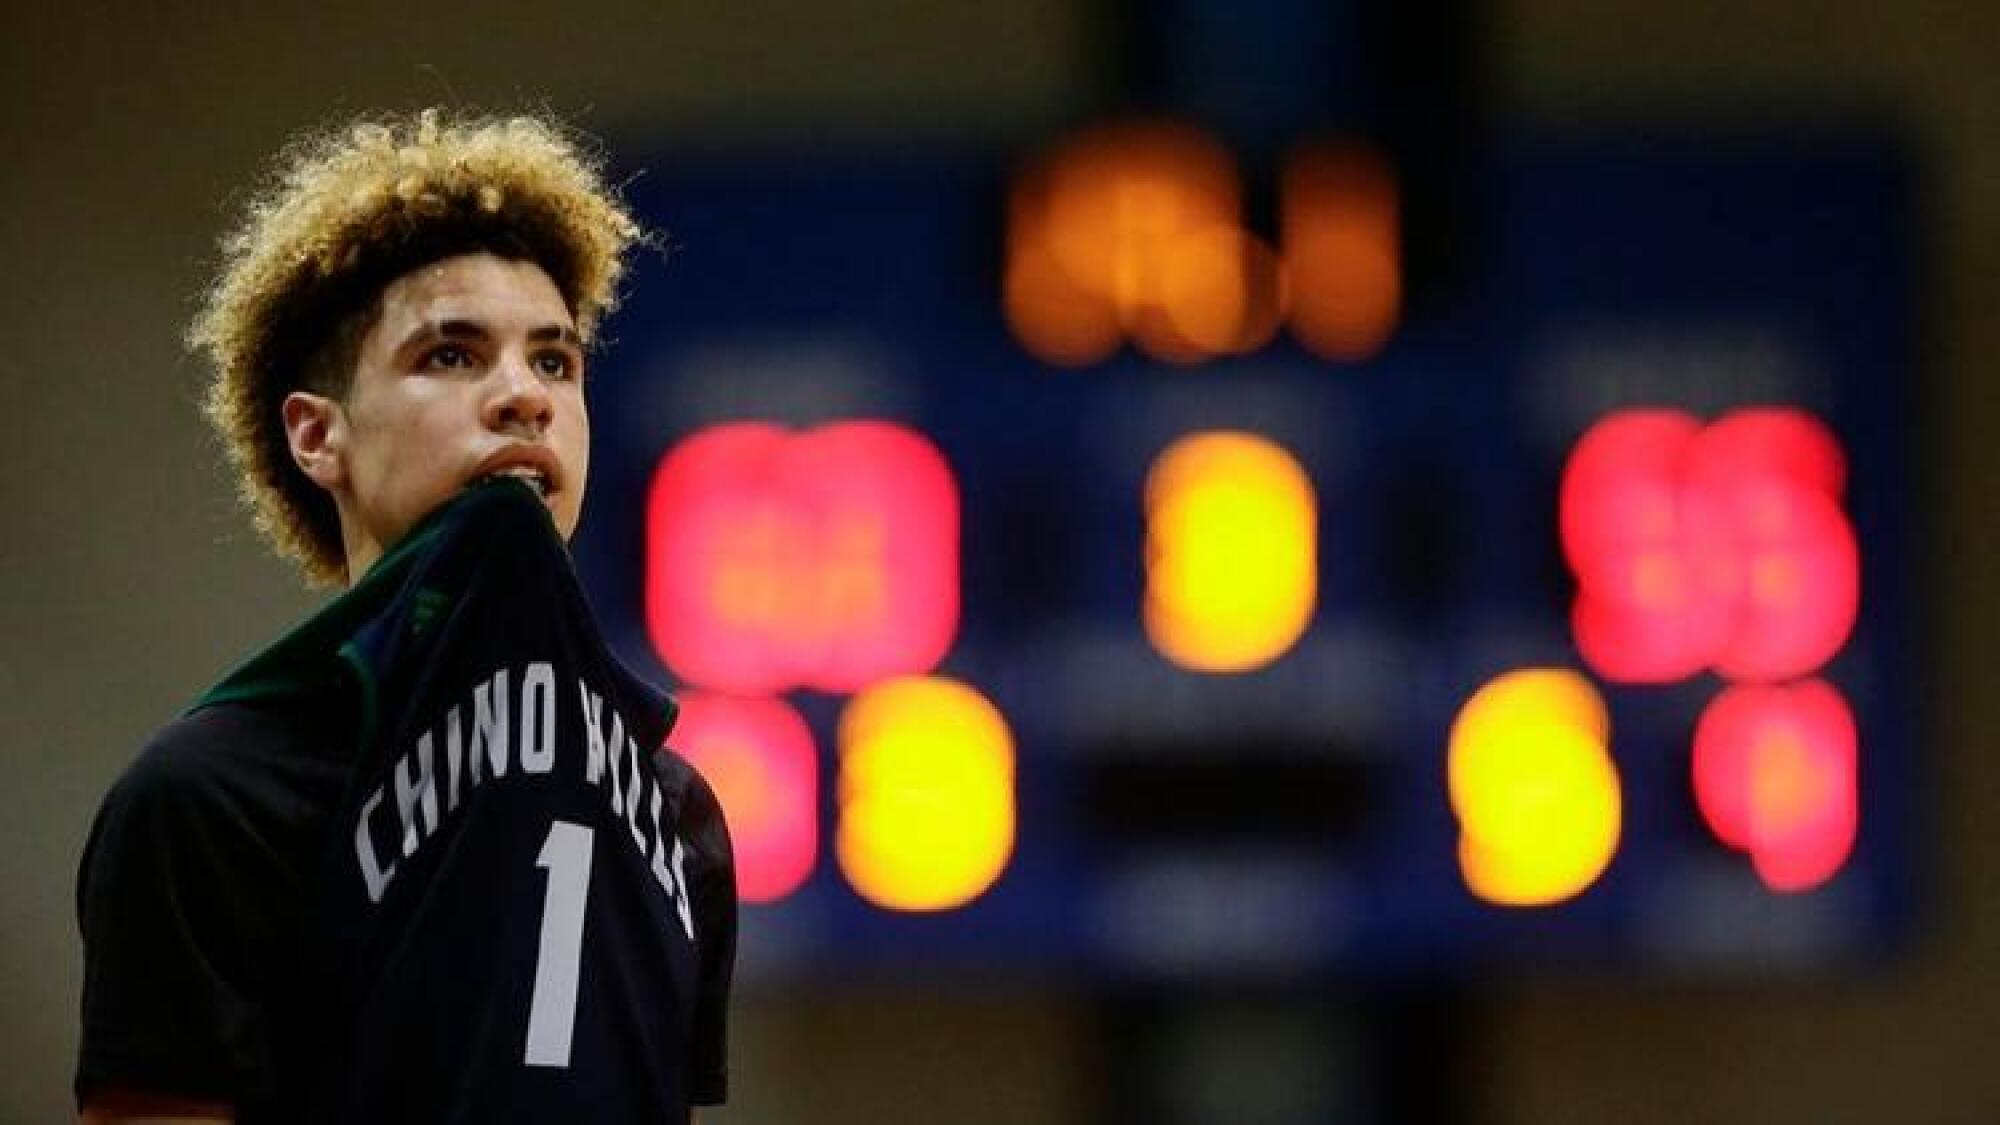 LaMelo Ball of Chino Hills bites on his jersey during a break in play.